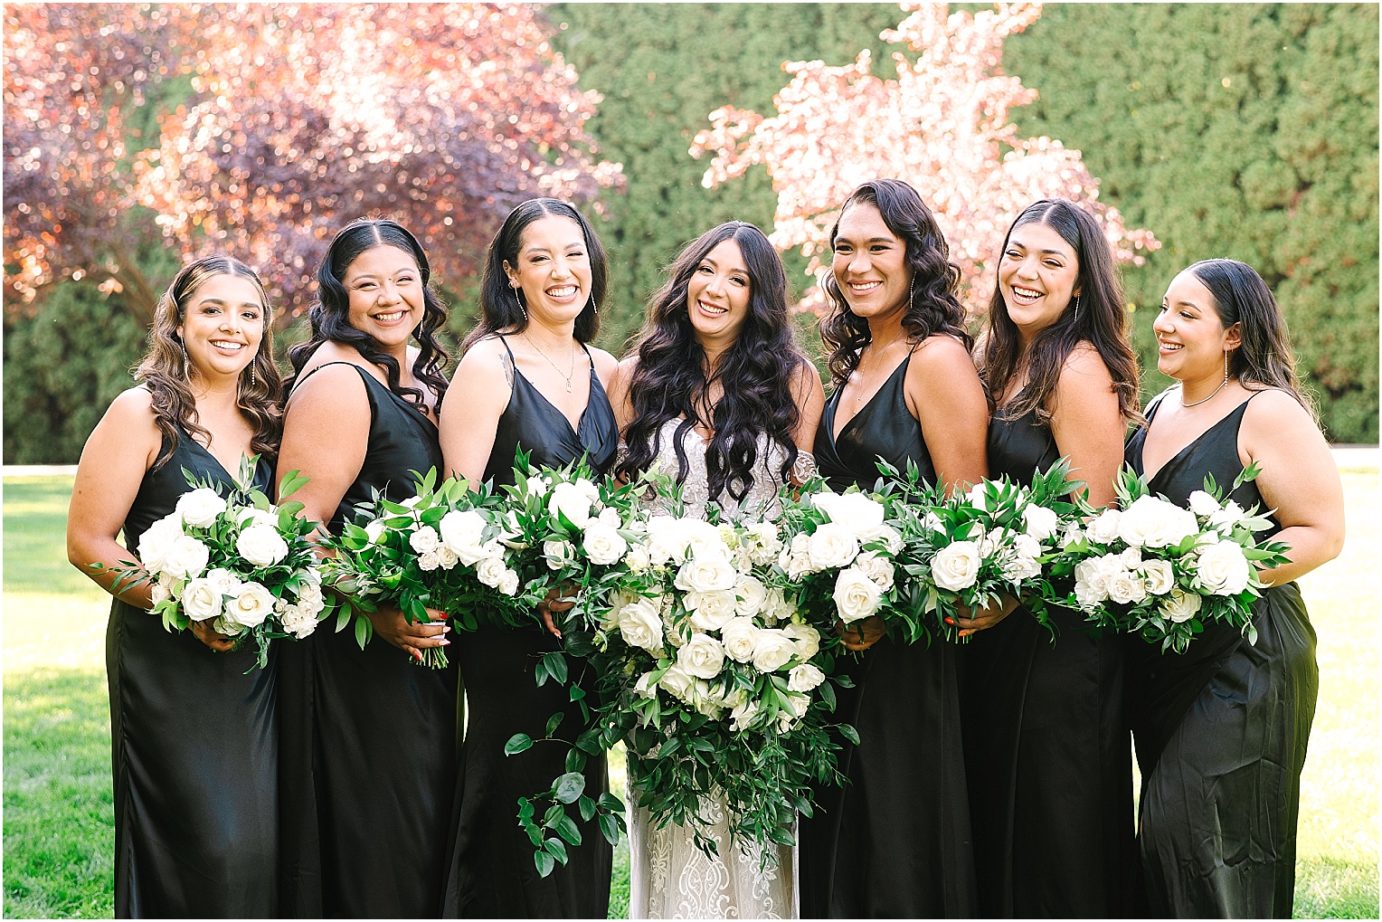 Wedding at Promise Garden bride with bridesmaids in black dresses